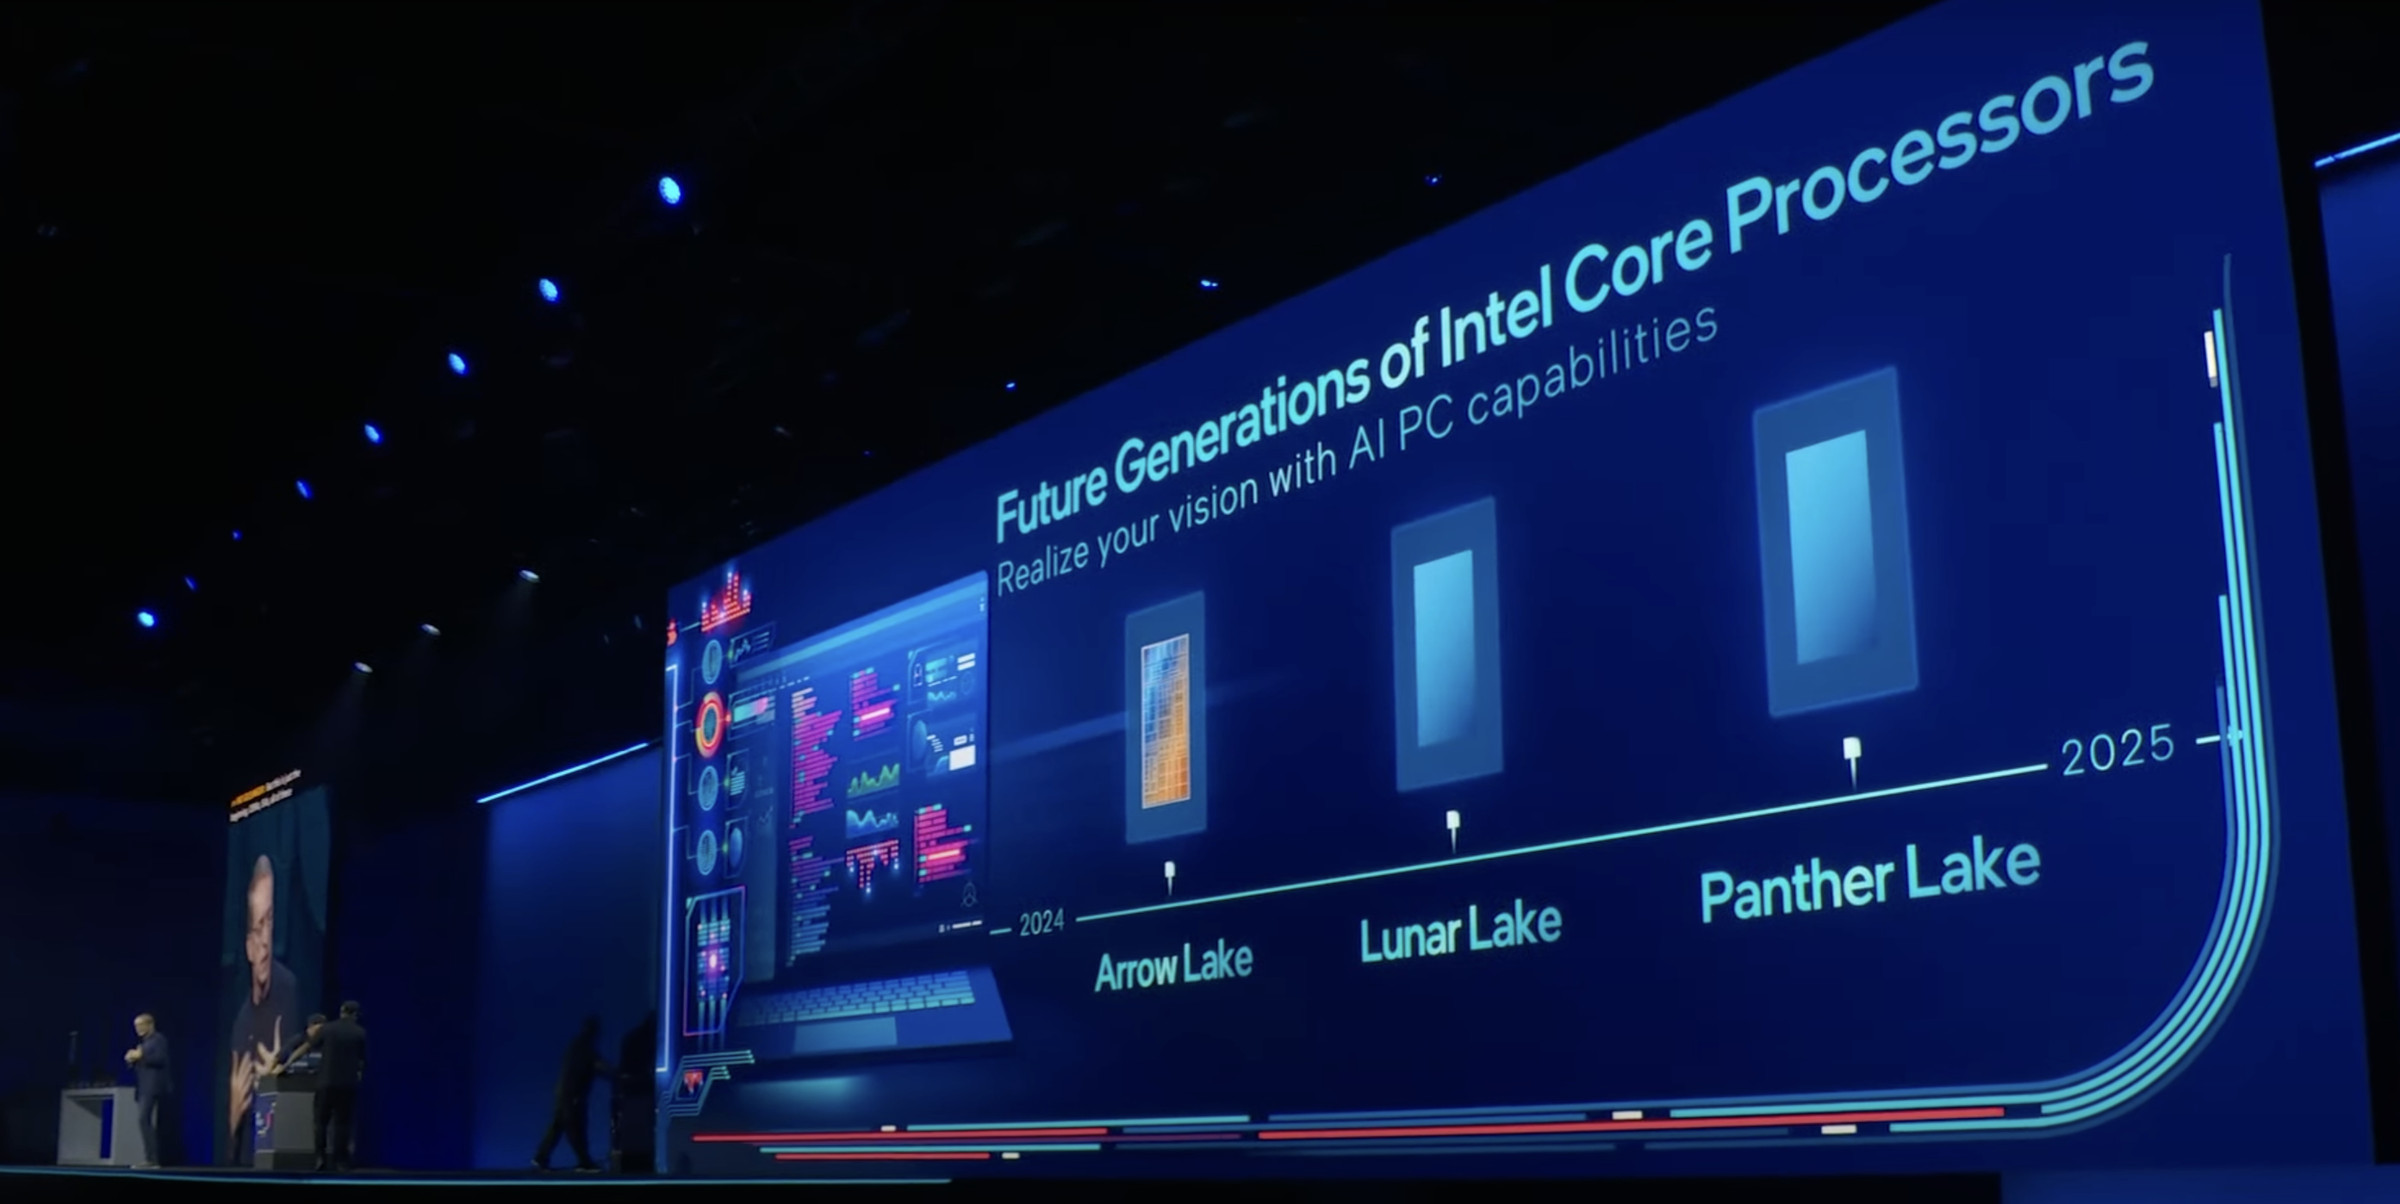 A slide at Intel Innovation reading Future Generations of Intel Core Processors, realize your vision with AI PC capabilities. A timeline shows Arrow Lake, Lunar Lake, Panther Lake in order between 2024 and 2025.